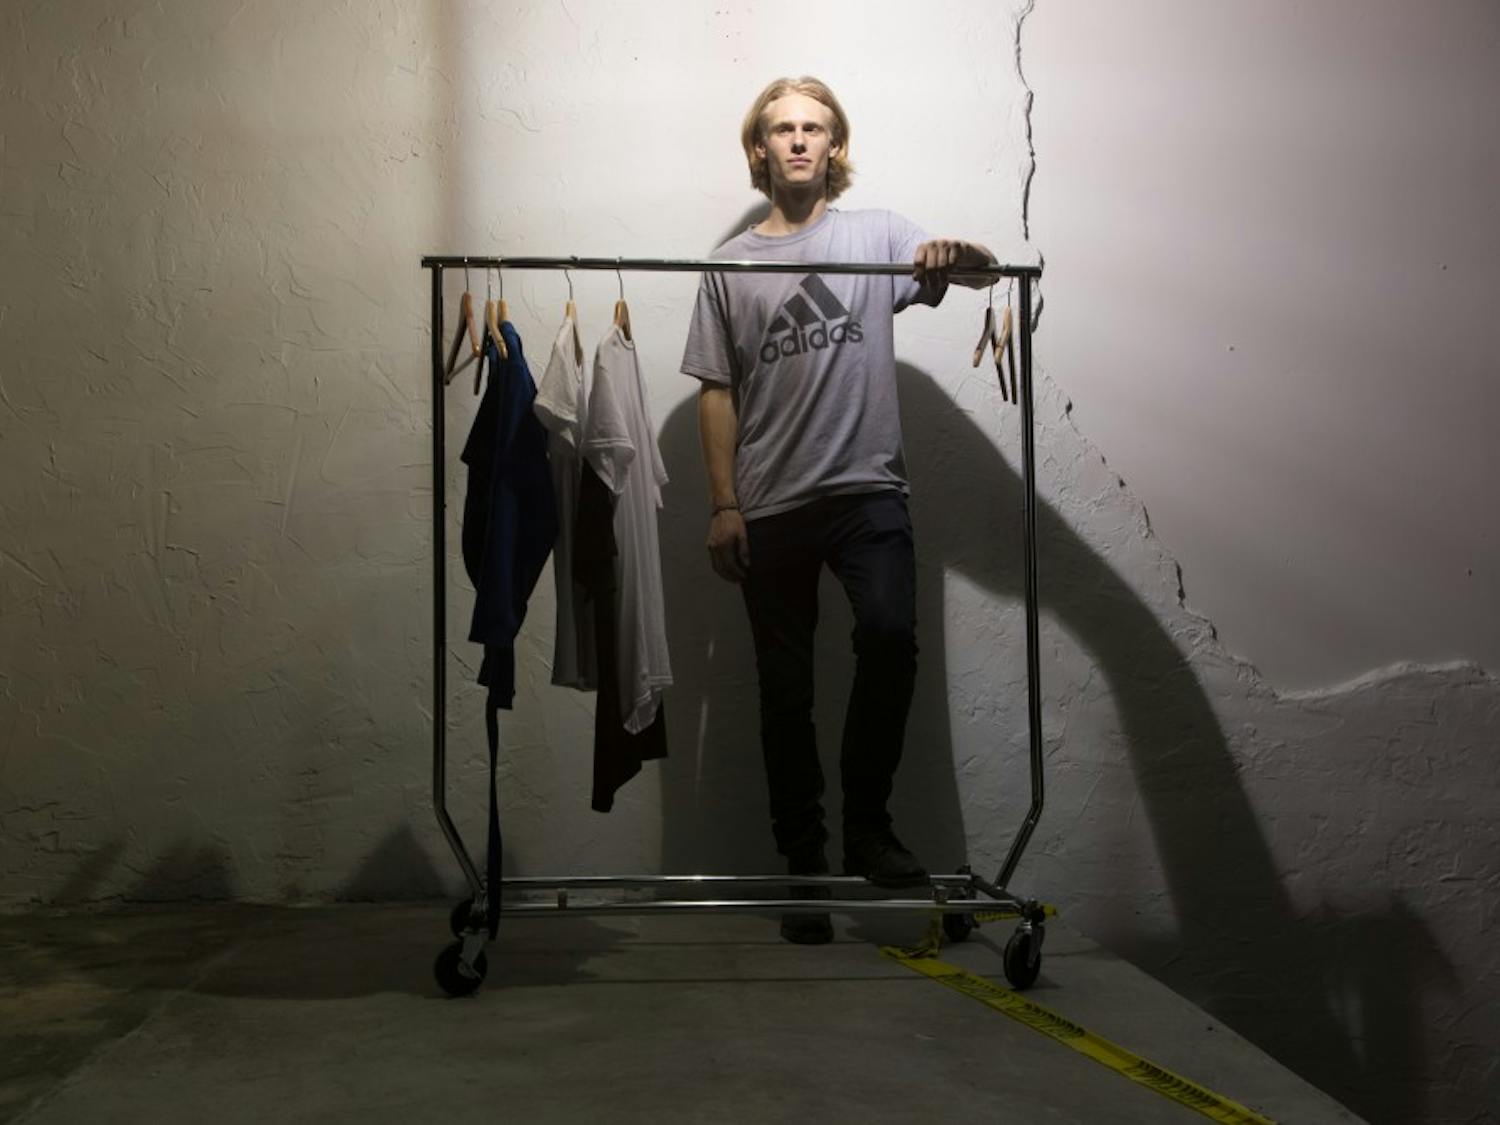 James Creissen, a sophomore business major, poses in front of a rack of clothes he designed. Creissen held a fashion show on East Rosemary Street Thursday night.&nbsp;